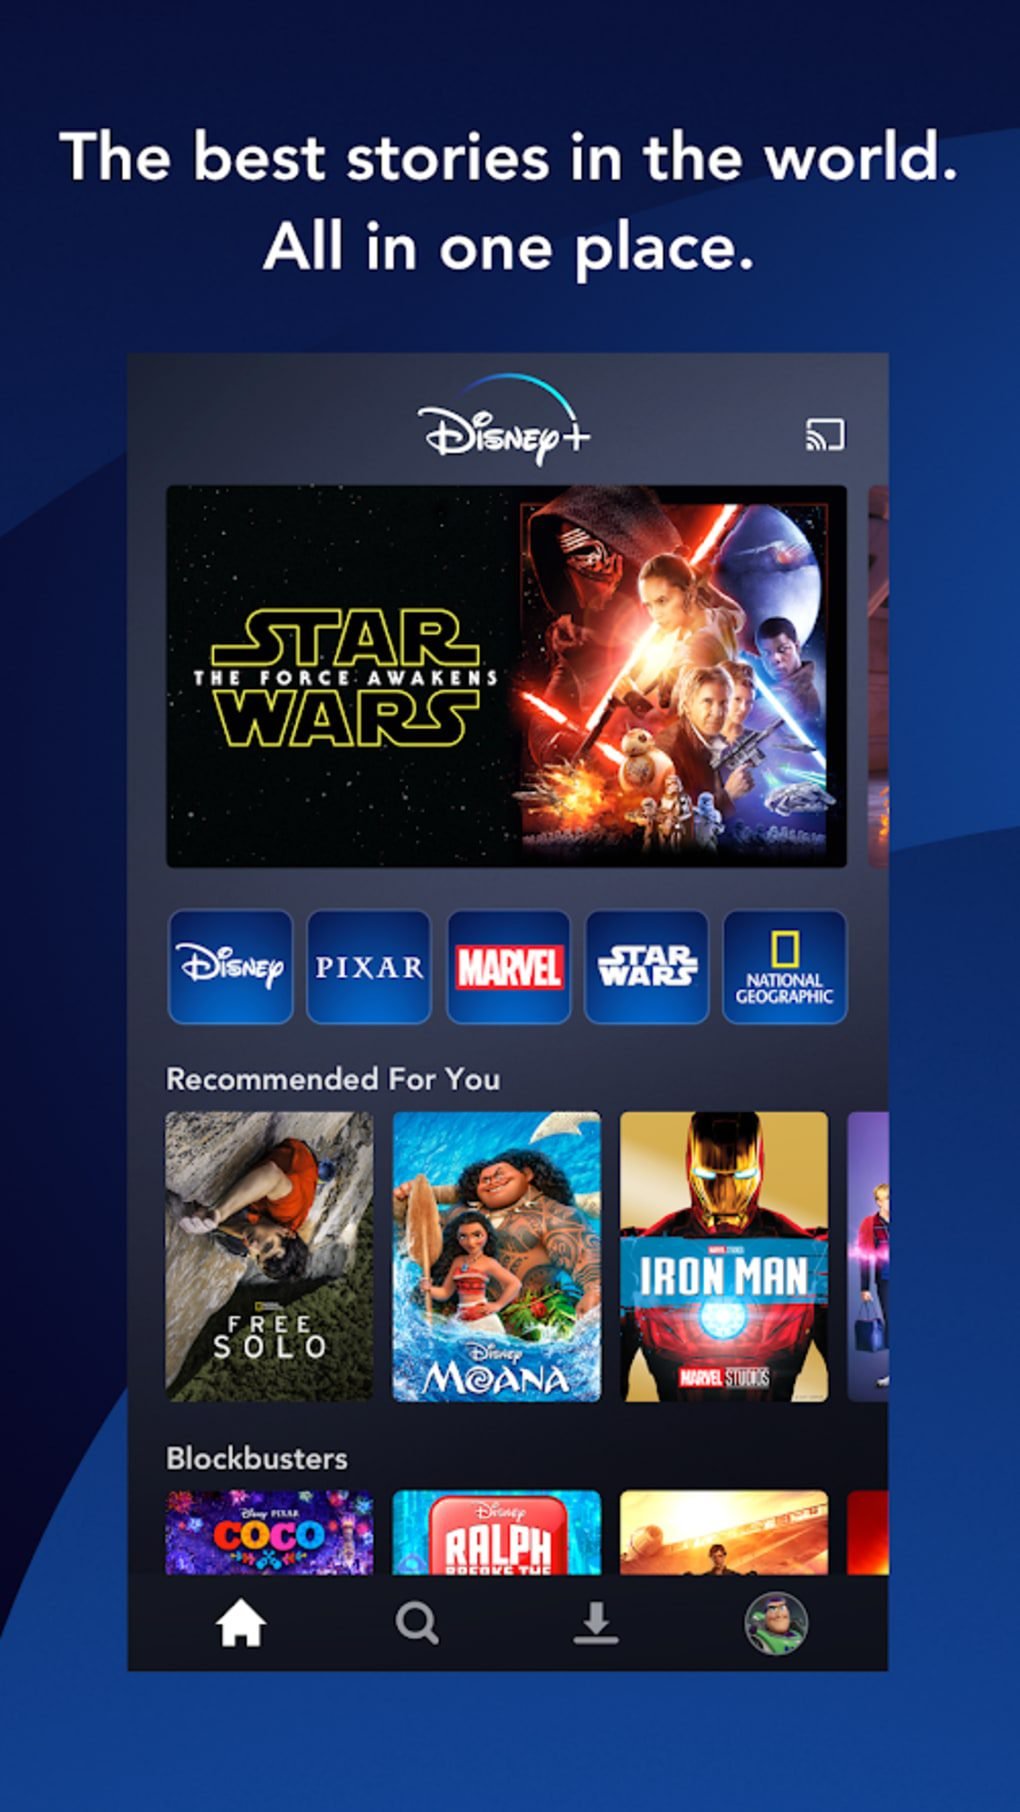 disney plus app android - Online Discount Shop for Electronics, Clothing, Toys, Books, Games, Computers, Shoes, Jewelry, Watches, Baby Products, Sports & Outdoors, Office Products, Bed & Bath, Furniture, Tools, Hardware, Automotive